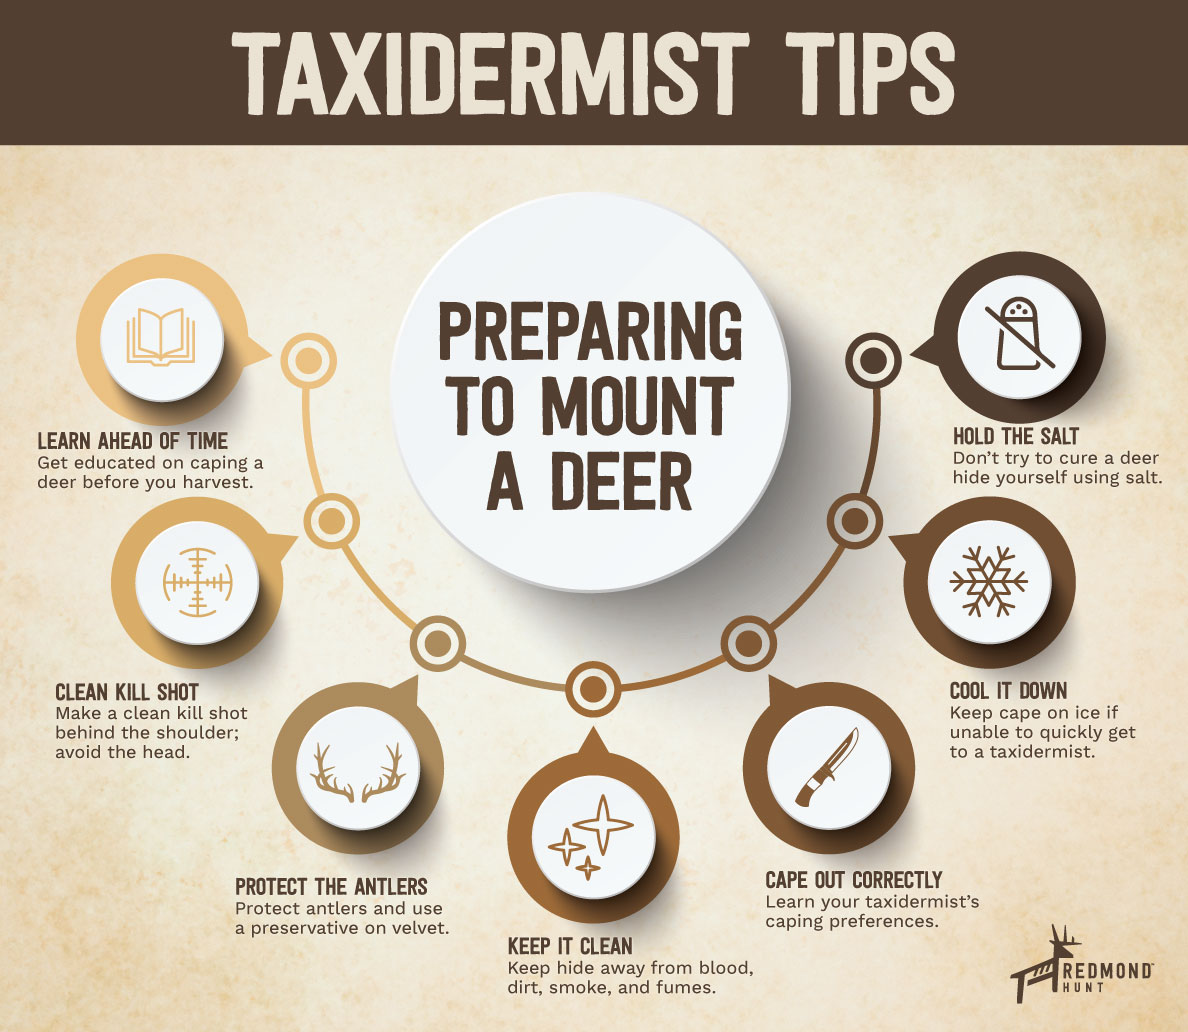 tips-from-a-taxidermist-how-to-prep-deer-for-mounting